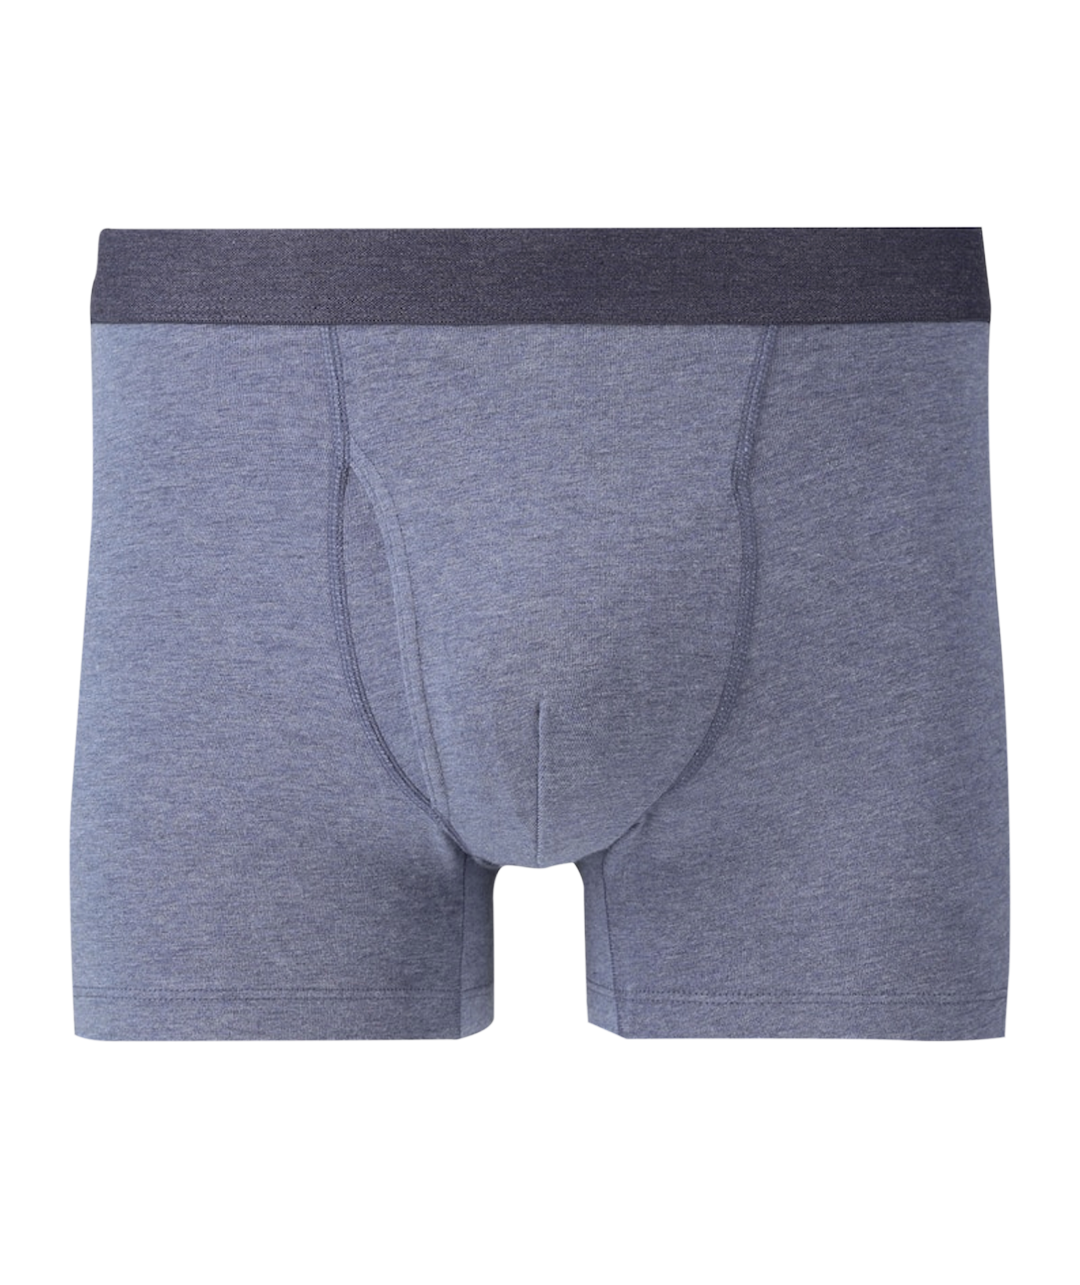 his boxer shorts,OFF 80%,www.concordehotels.com.tr